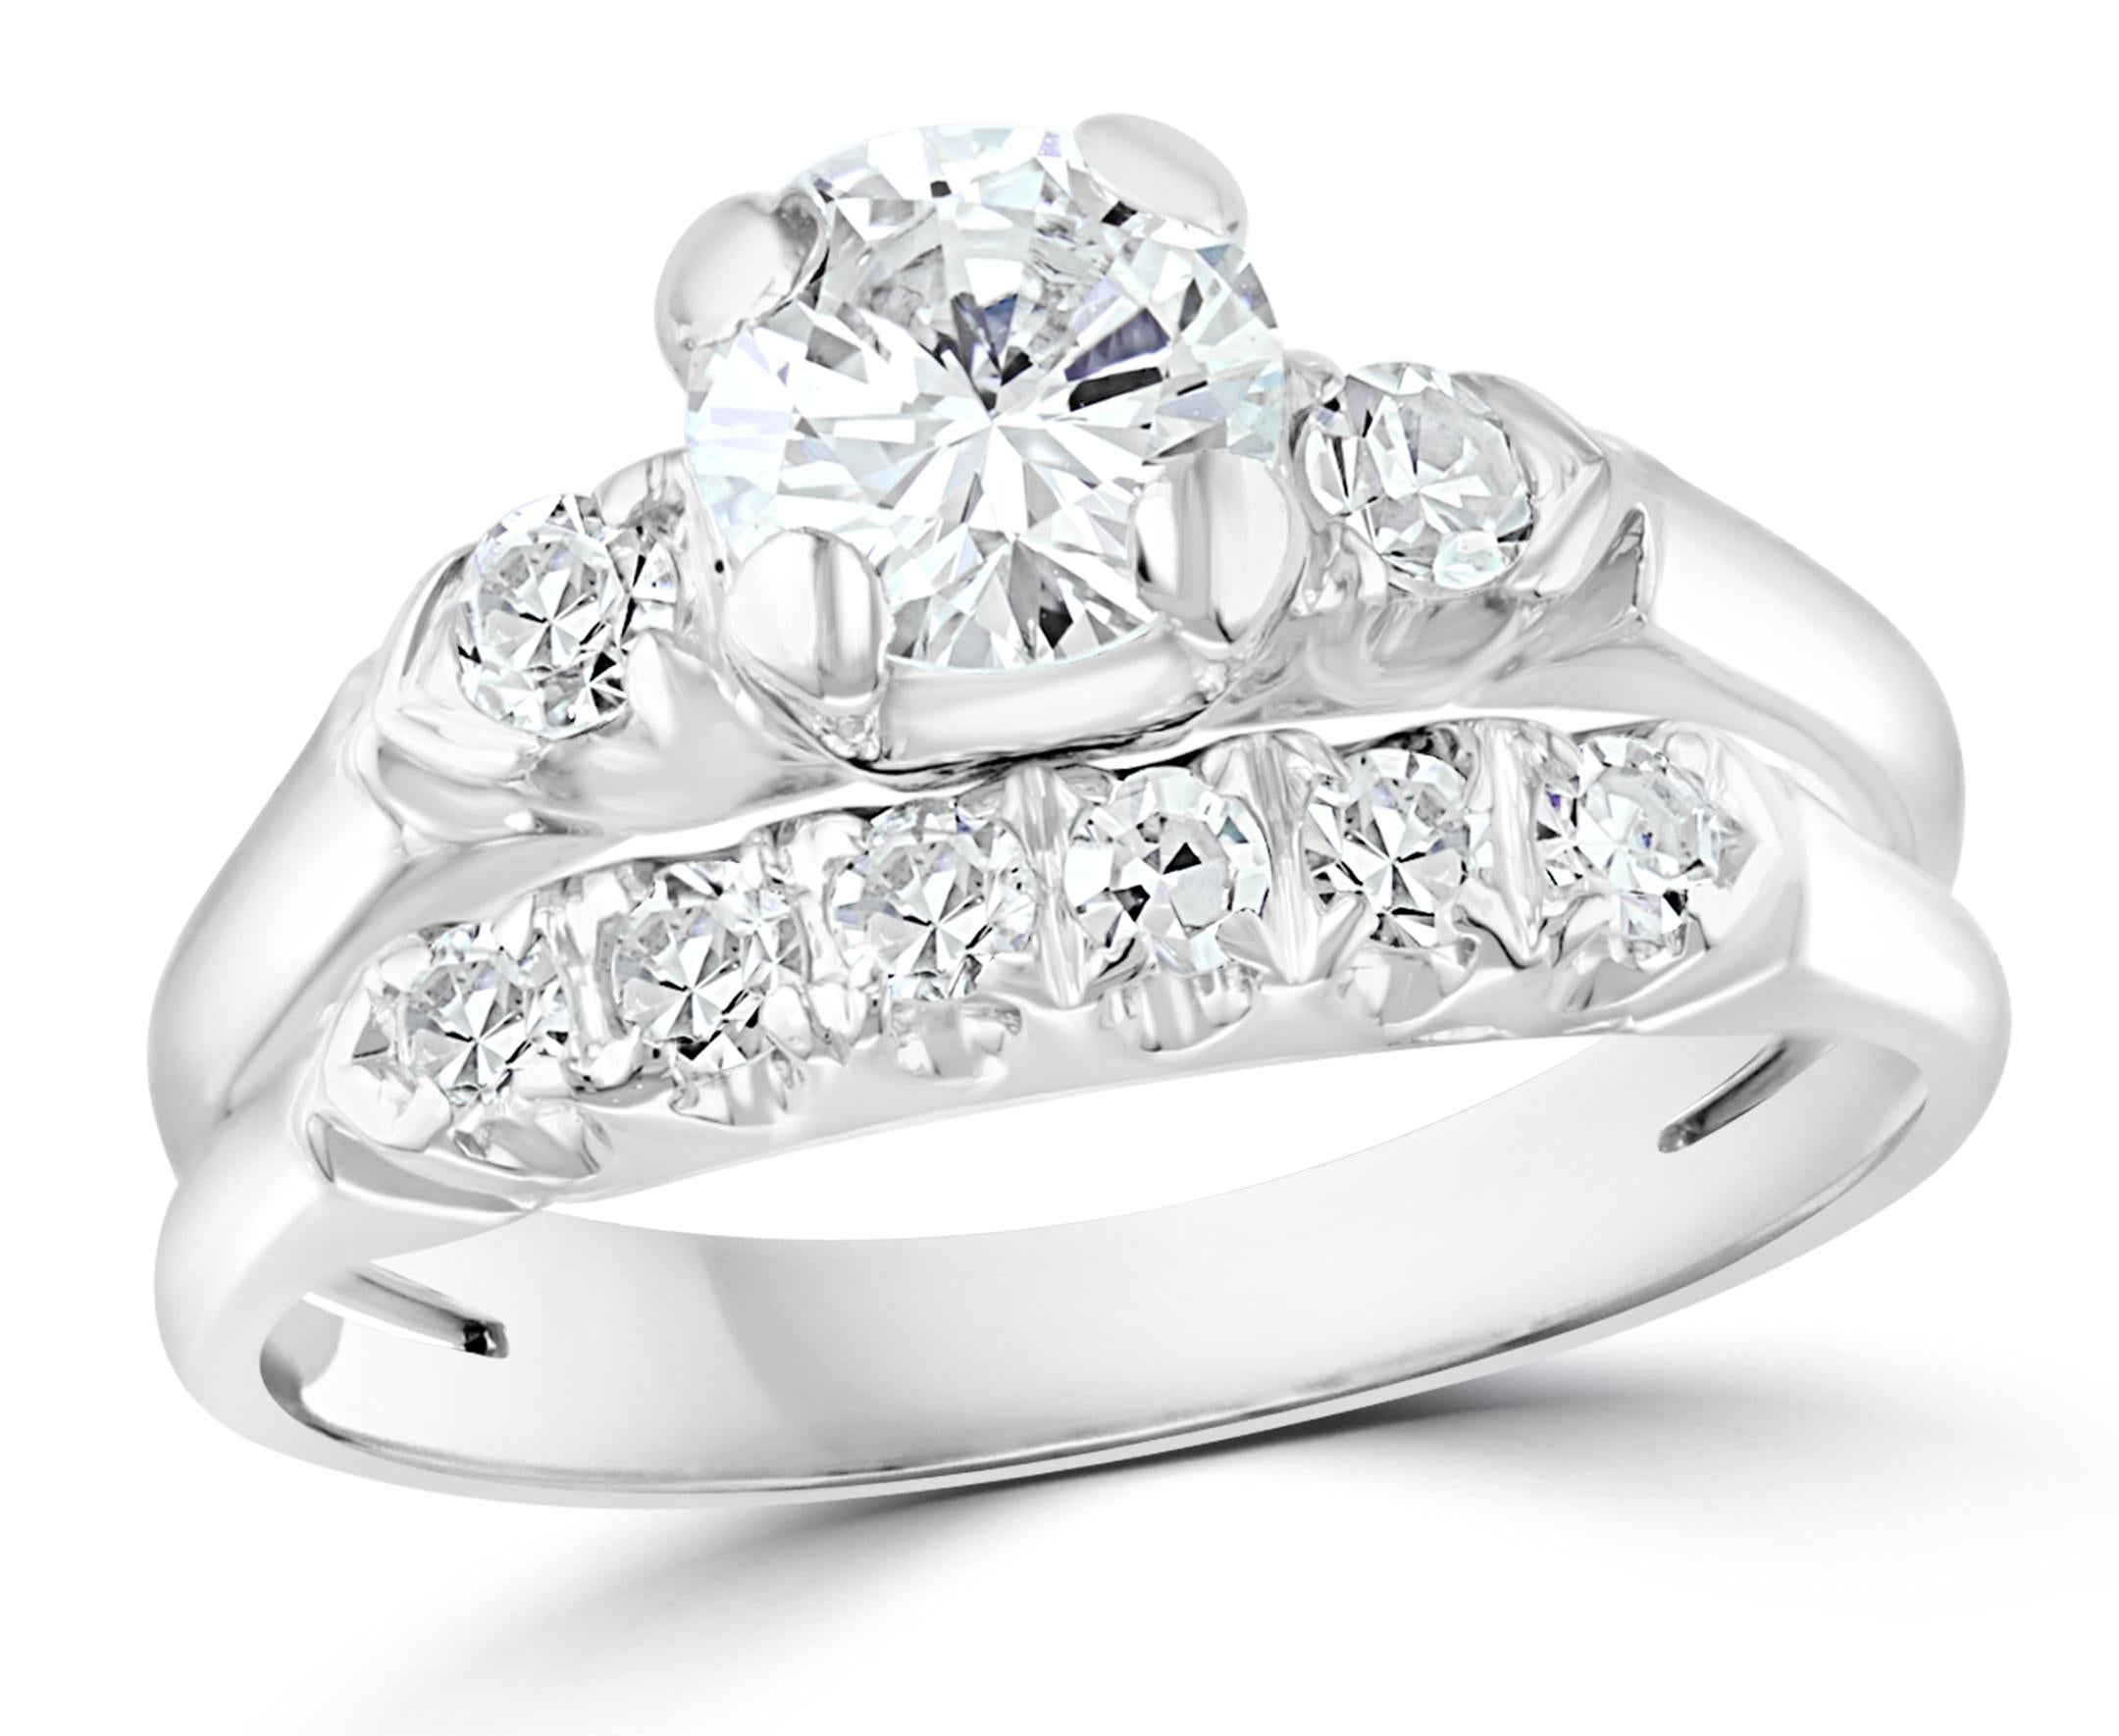 Approximately 0.6 Ct Solitaire Round Center Diamond 14 Kt White Gold Ring & Band For Sale 5